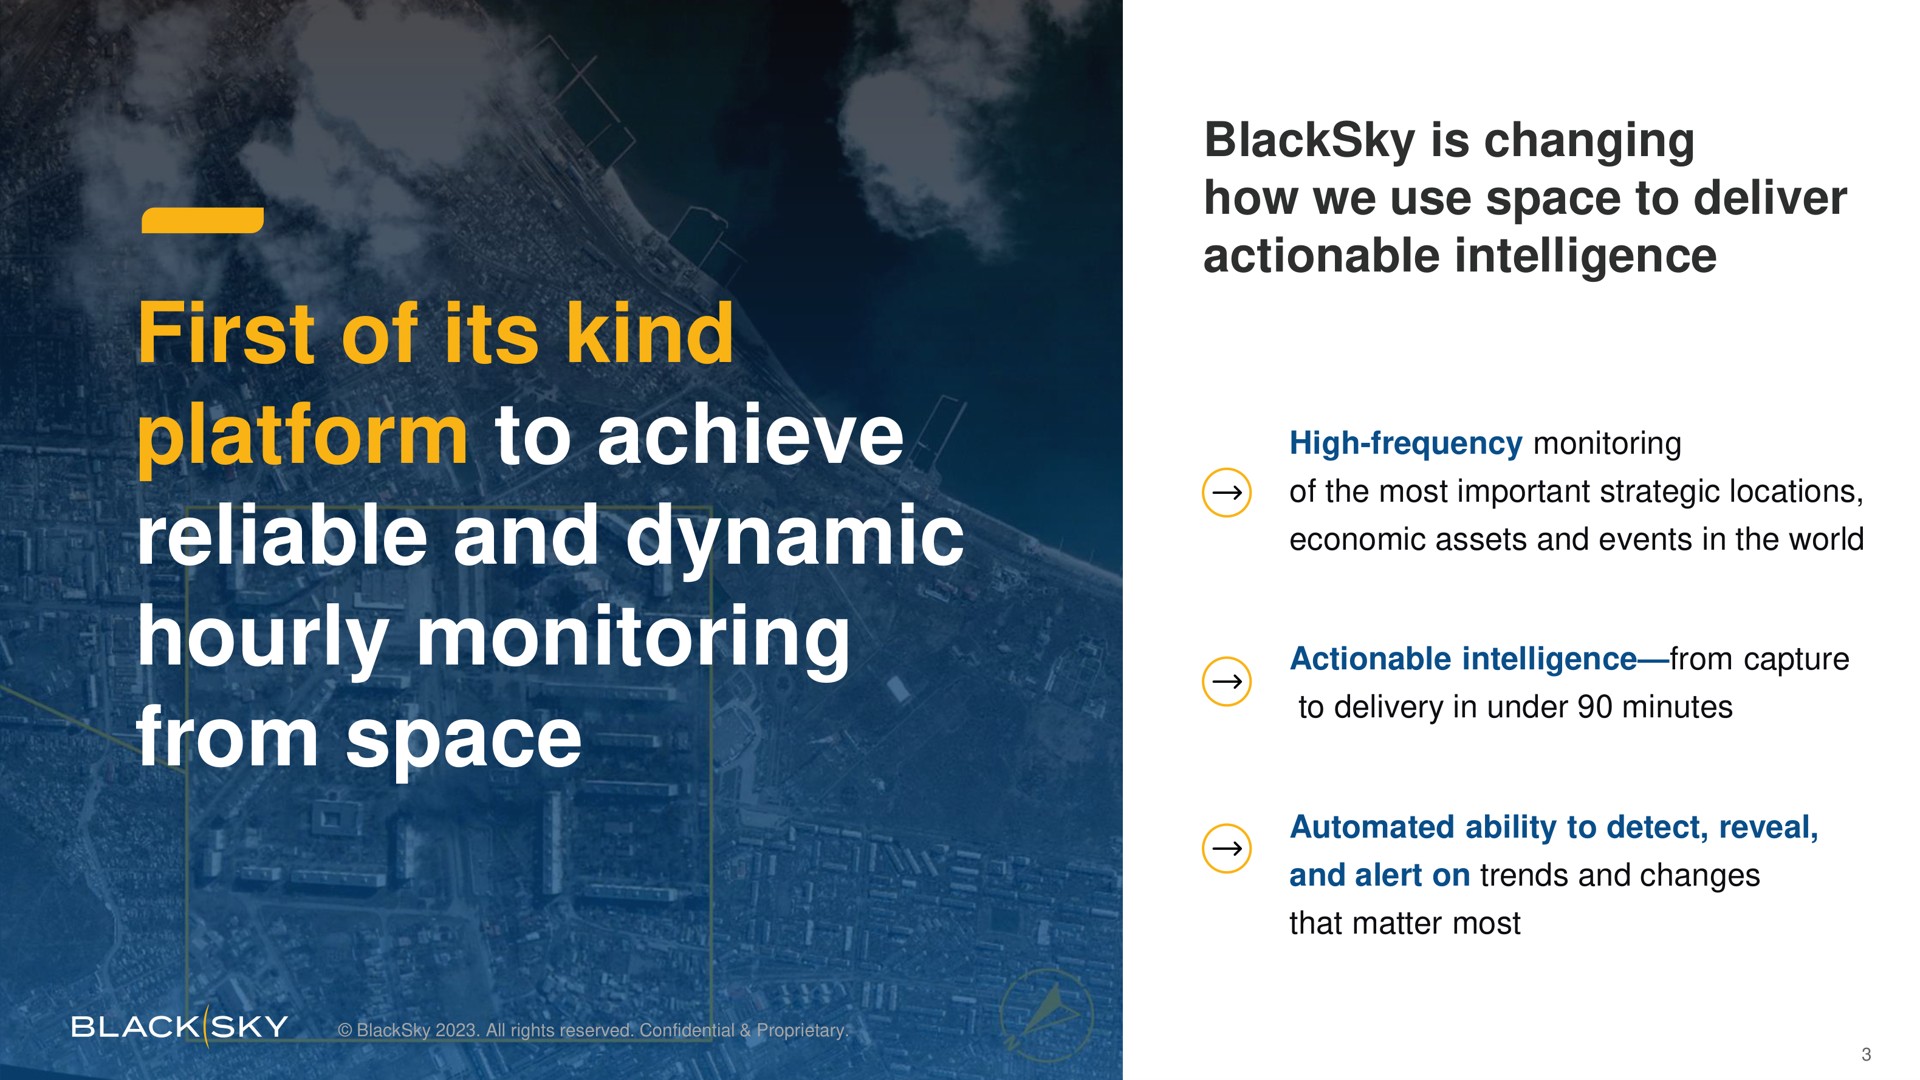 first of its kind platform to achieve reliable and dynamic hourly monitoring from space is changing how we use space to deliver actionable intelligence a economic events in he word capture | BlackSky